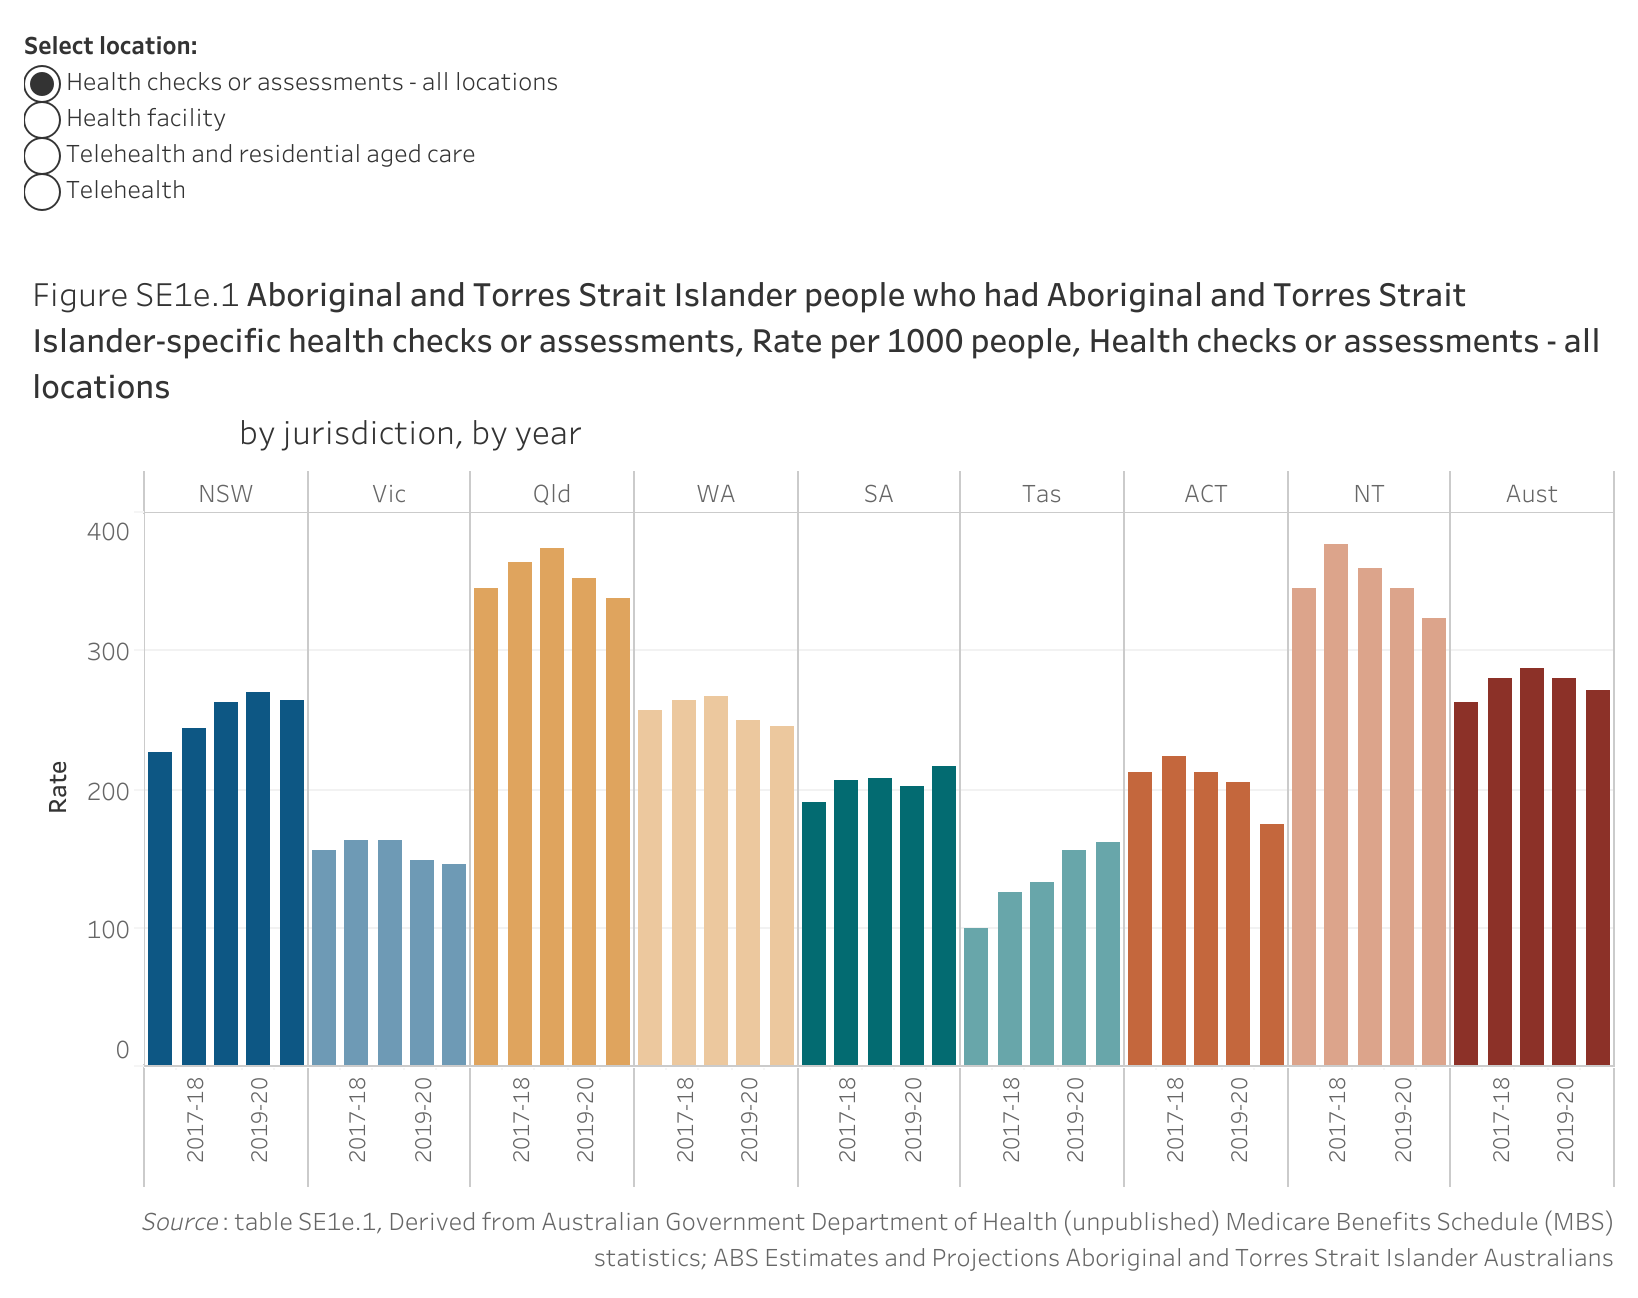 Figure SE1e.1. Bar chart showing the rate of Aboriginal and Torres Strait Islander people who had Aboriginal and Torres Strait Islander-specific health checks or assessments completed per 1000 people, by jurisdiction and by year. Data table of figure SE1e.1 is below.